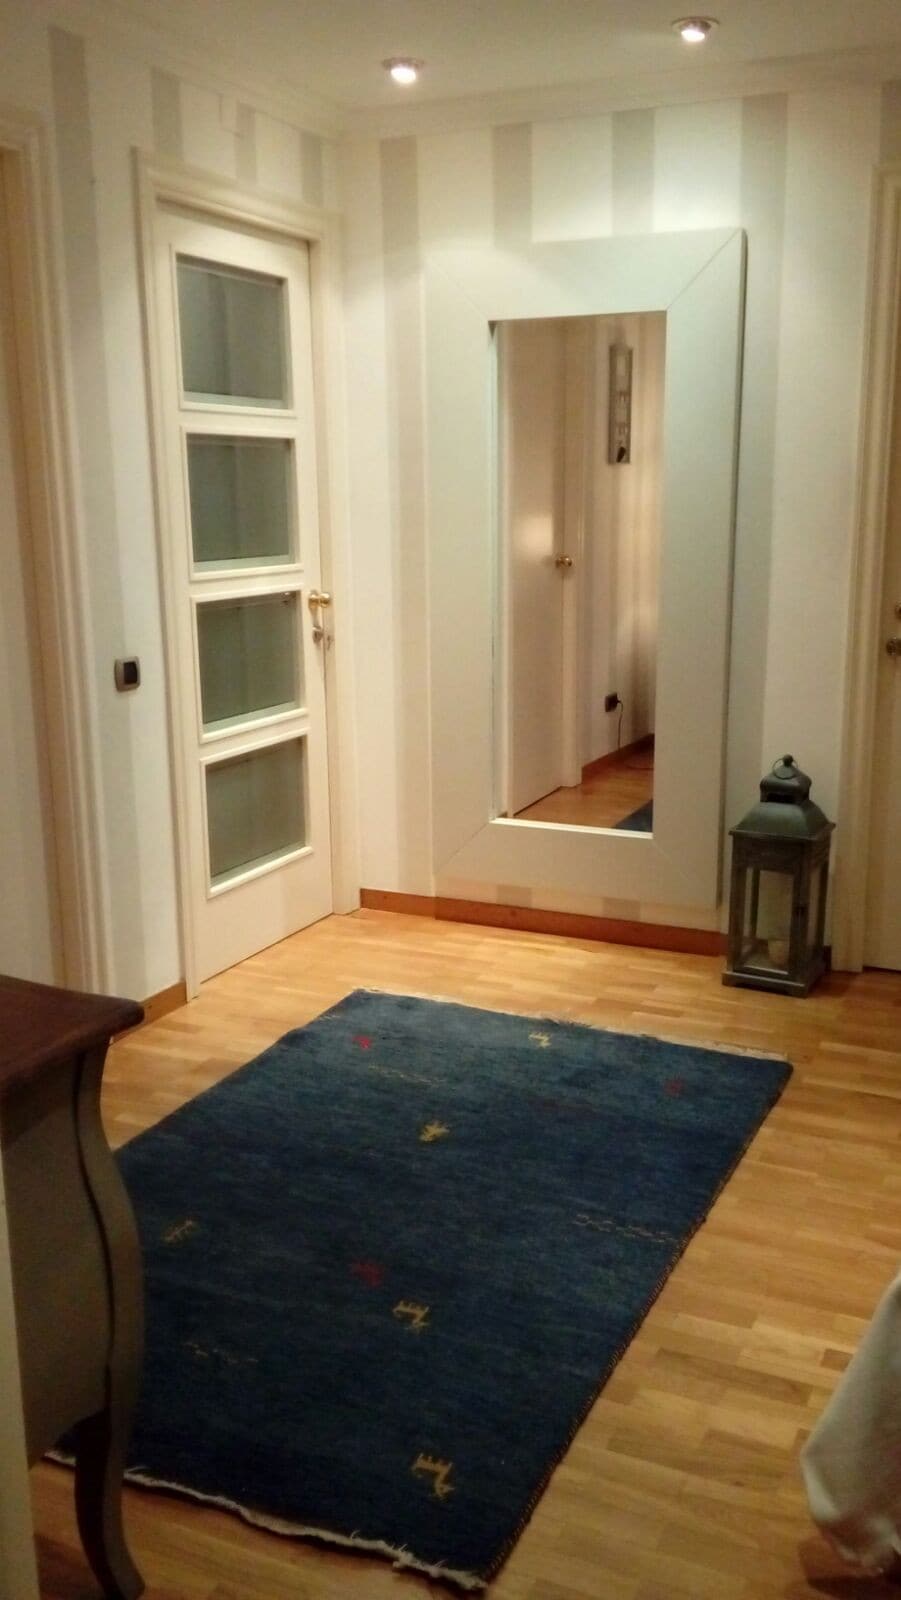 4.2Barcelona Sabadell. Room Private. Shared House